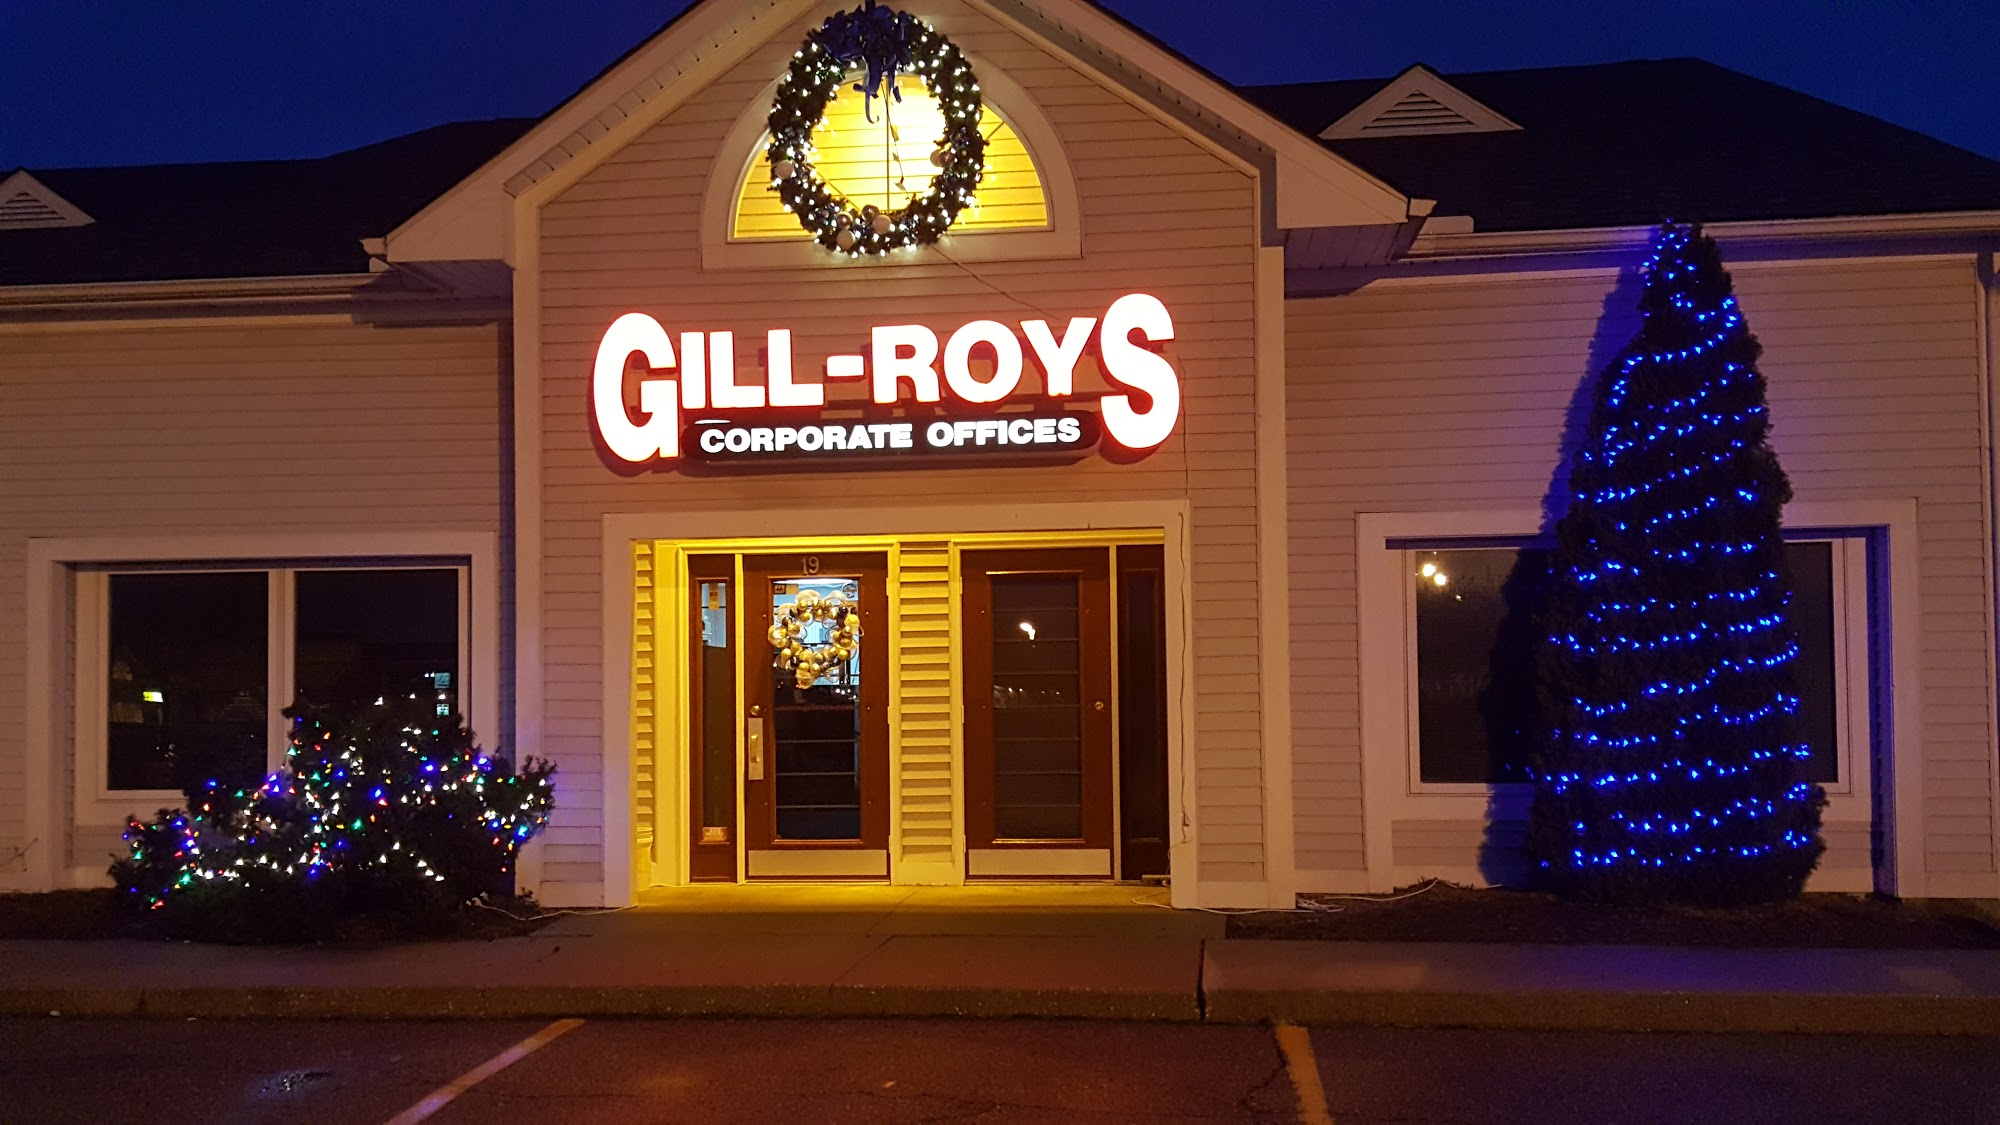 Gill-Roy's Hardware Corporate Office